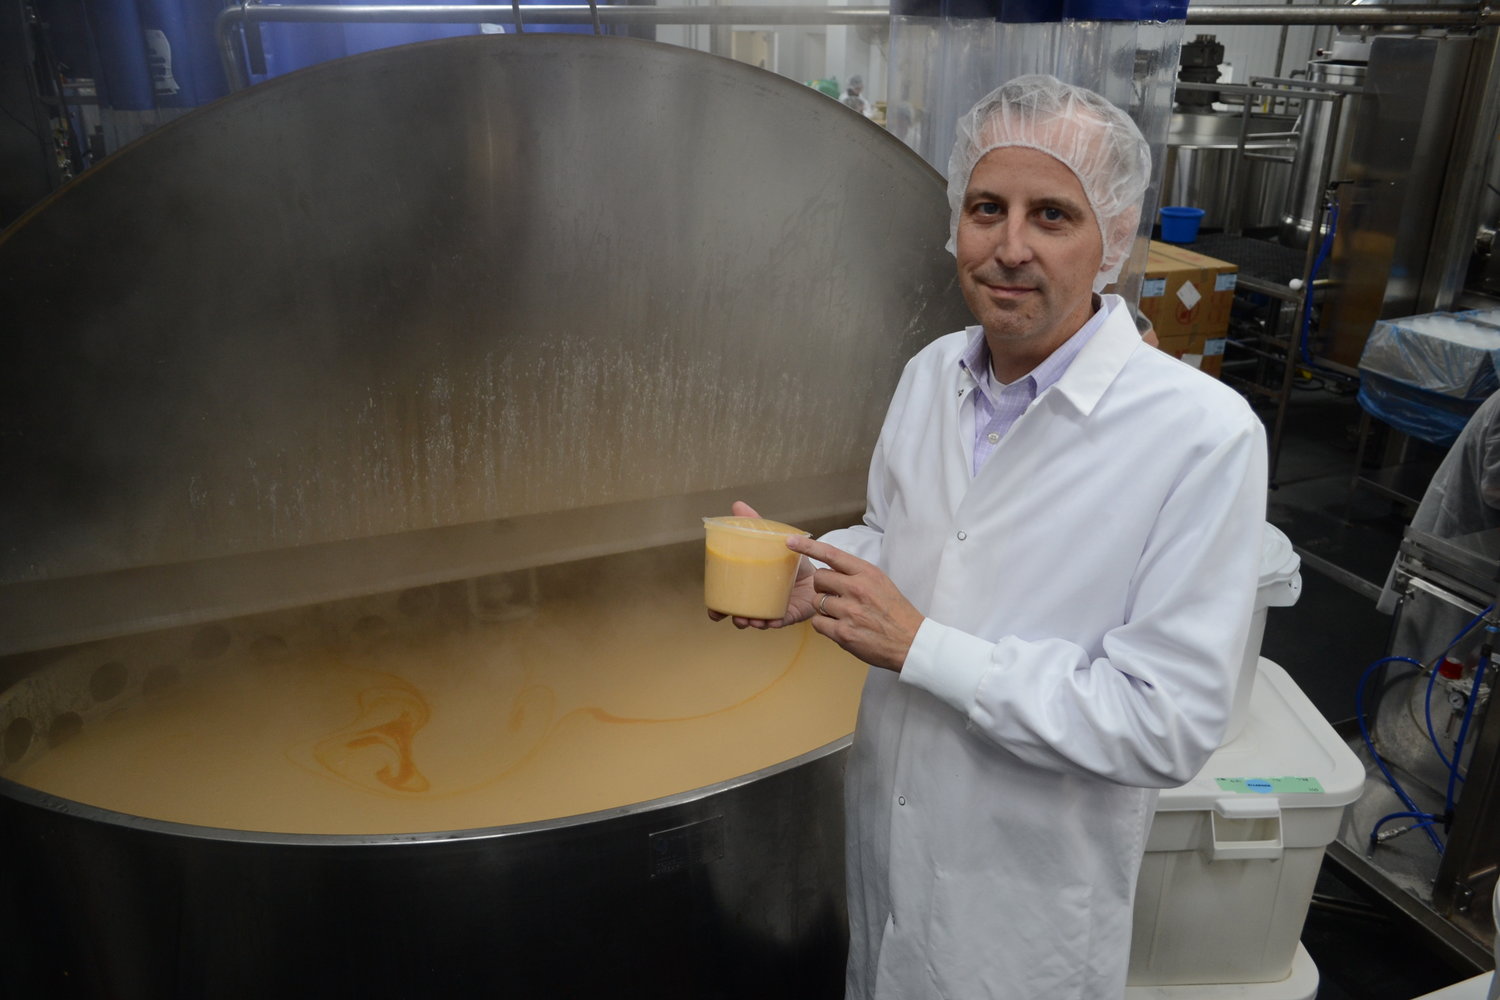 Todd Blount shows off a fresh batch of lobster bisque, one of the company’s top selling items, which is carried everywhere from small restaurants to supermarket giant Costco under their Kirkland brand.